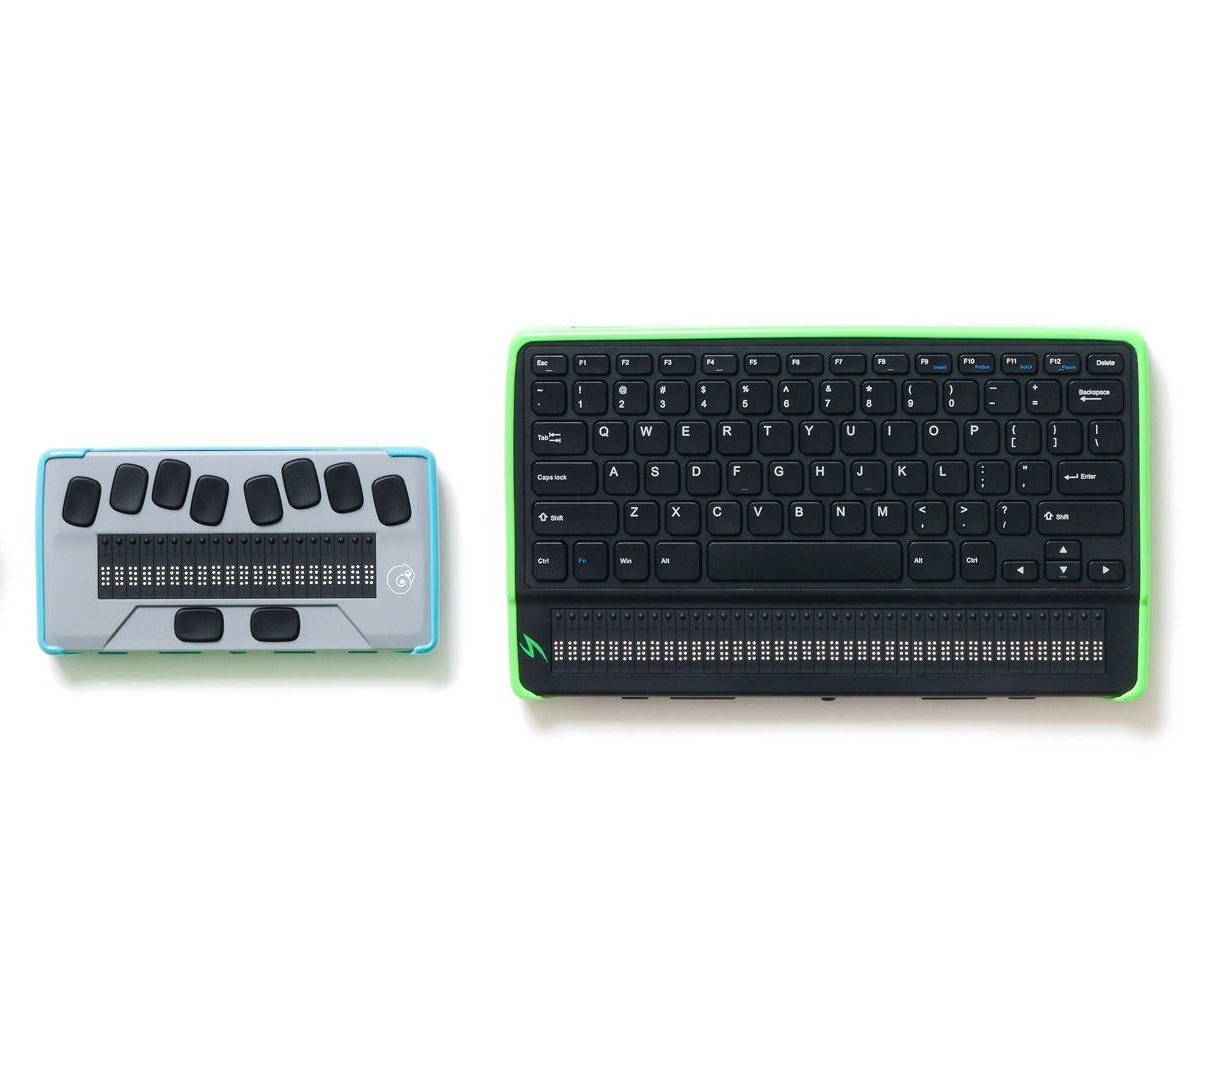 The Chameleon 20 and Mantis Q40 braille displays sit next to each other.